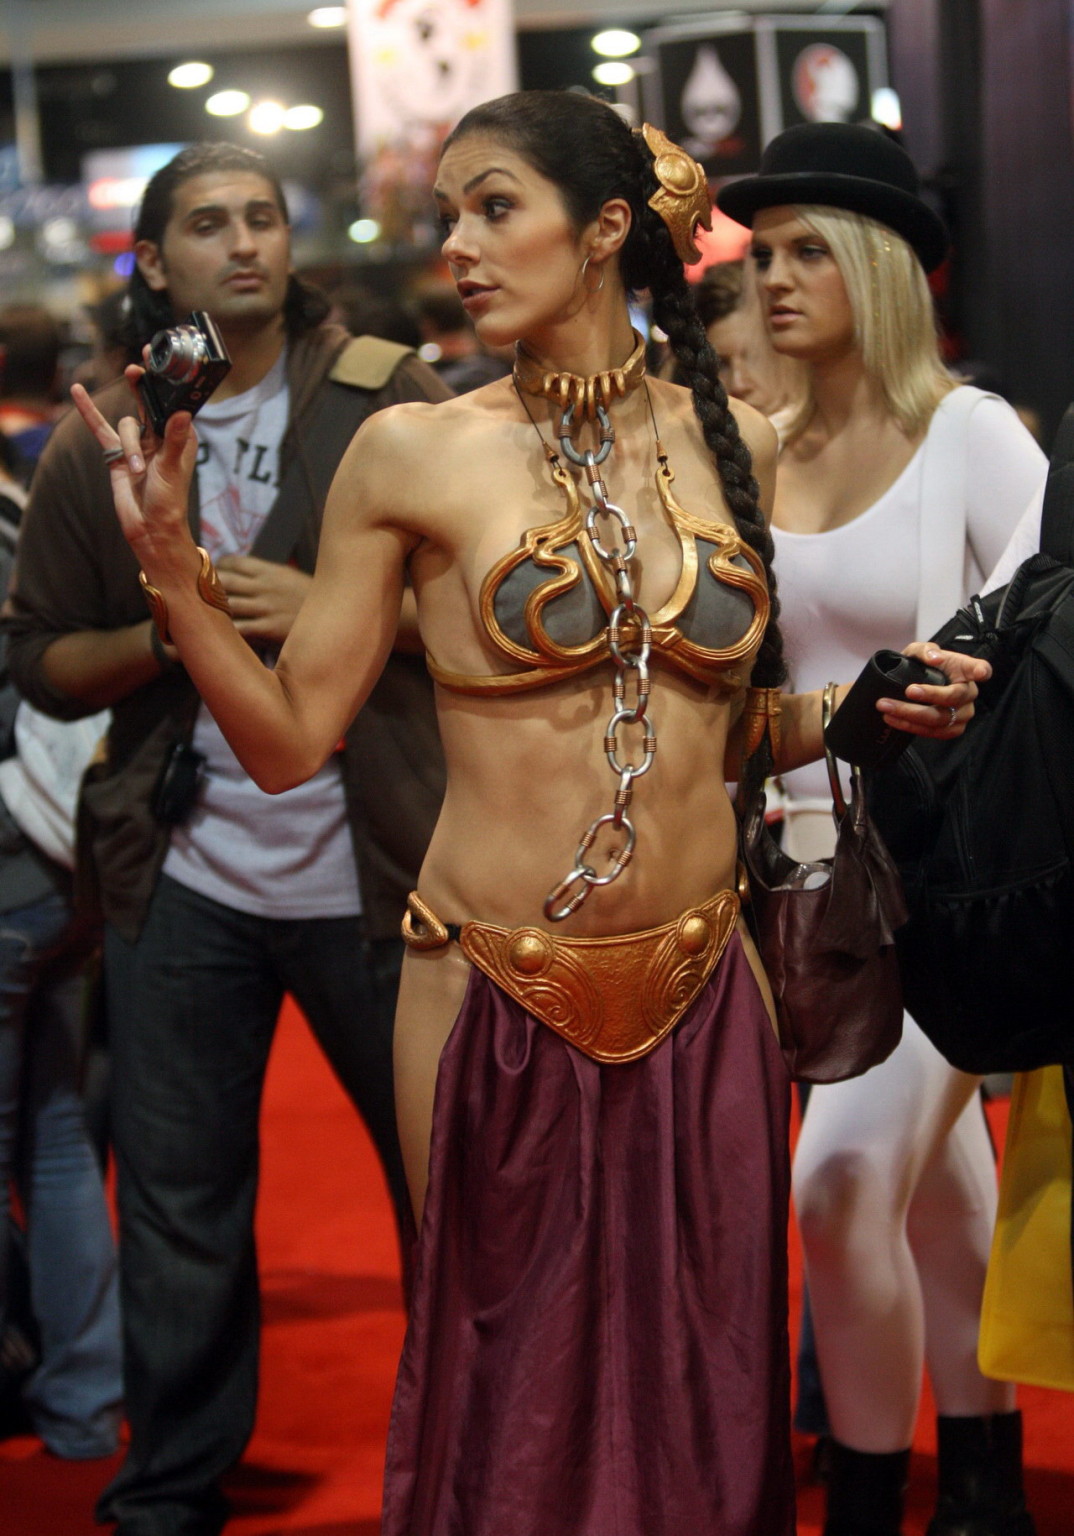 Adrianne Curry in sexy Princess Leia outfit at the Comic Con convention in San D #75339954